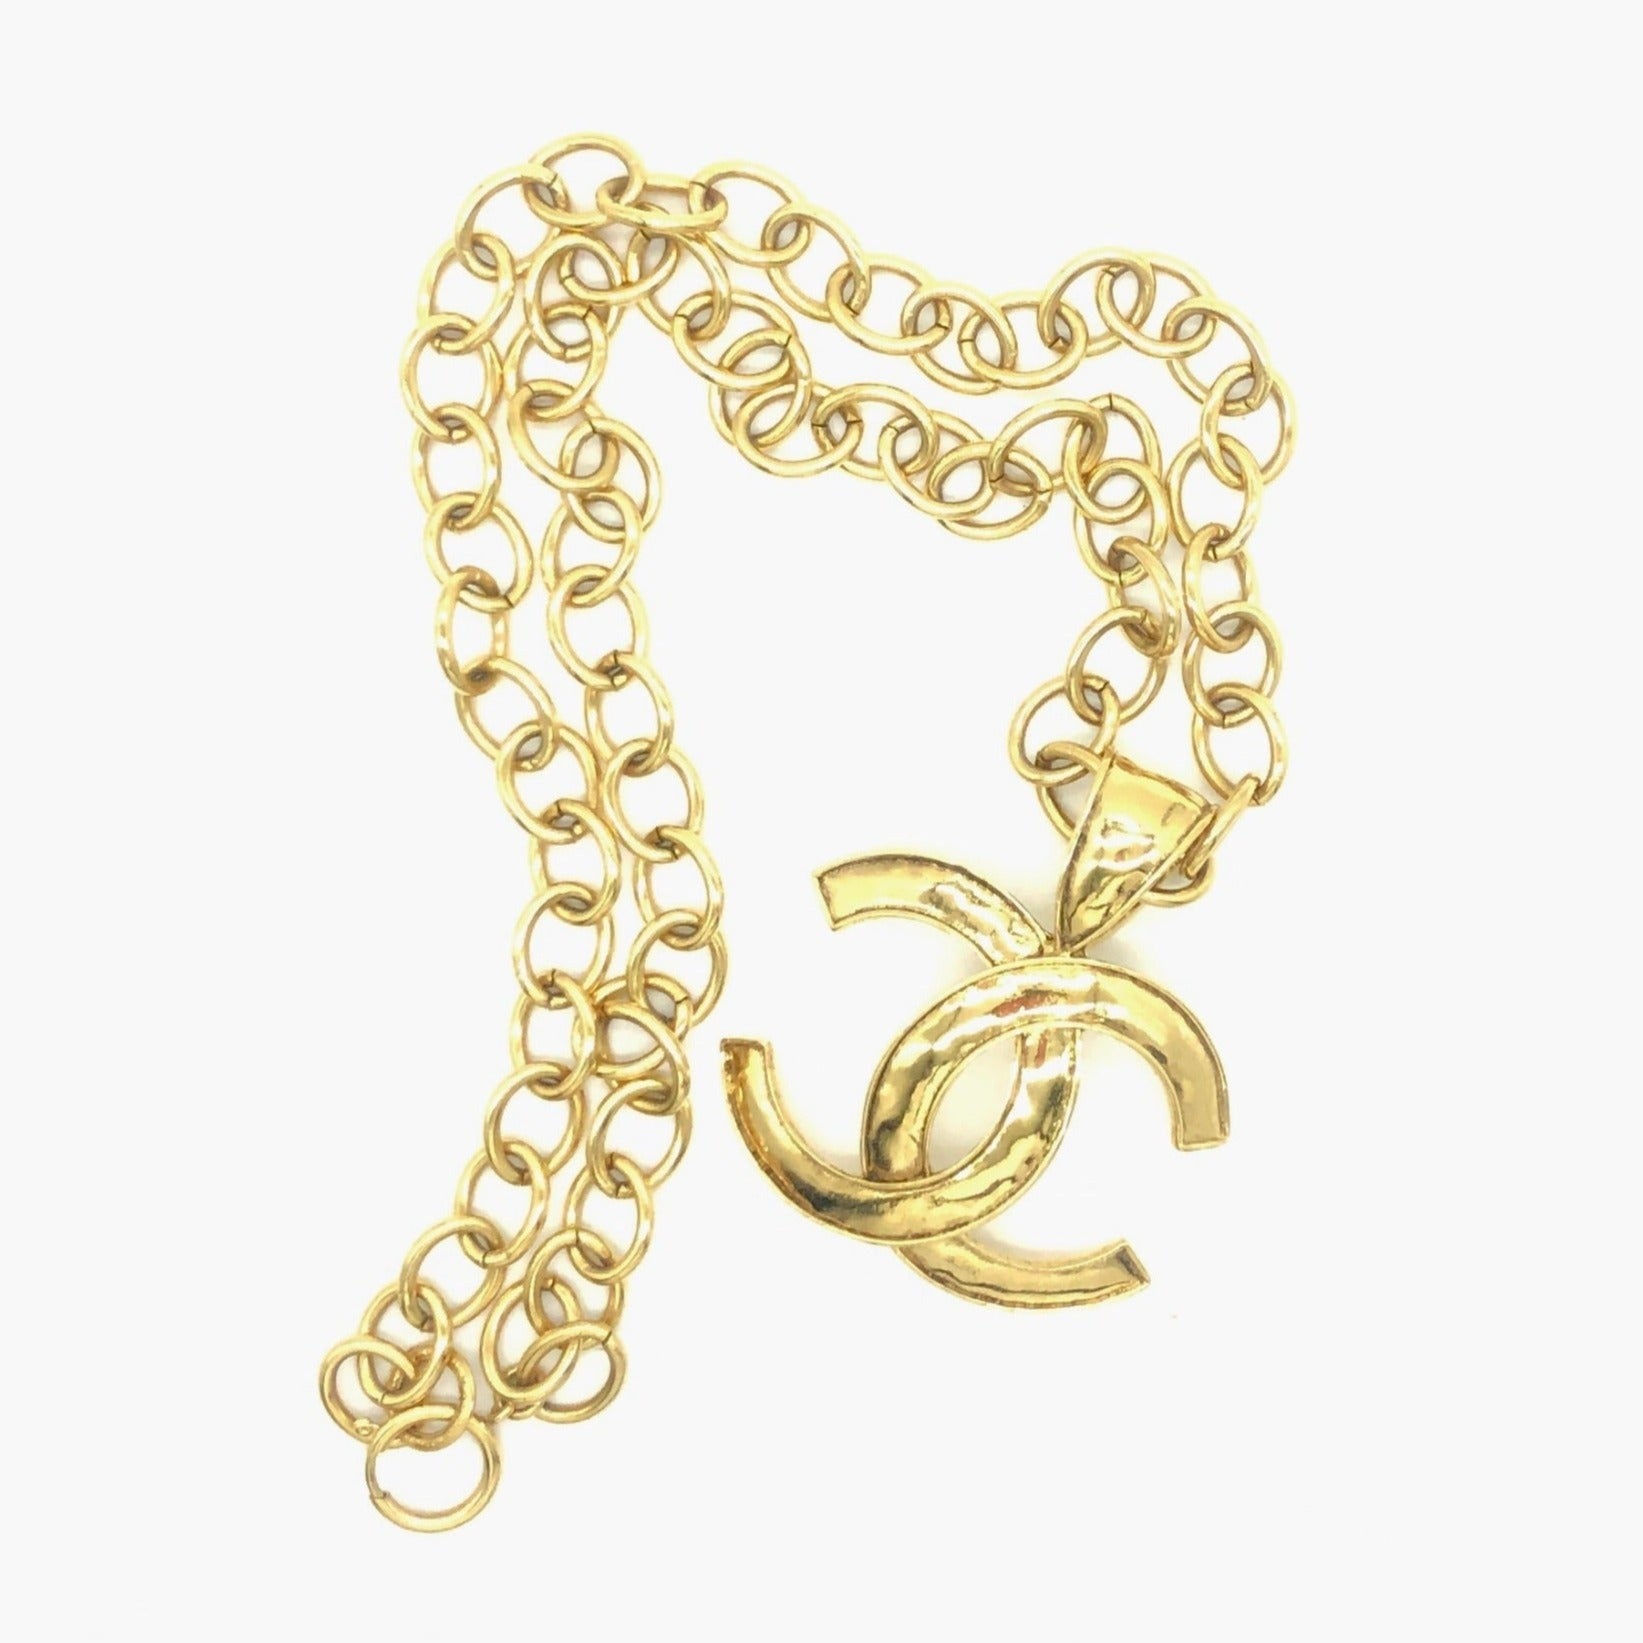 Chanel Large Link Necklace with CC Logo Pendant – Very Vintage